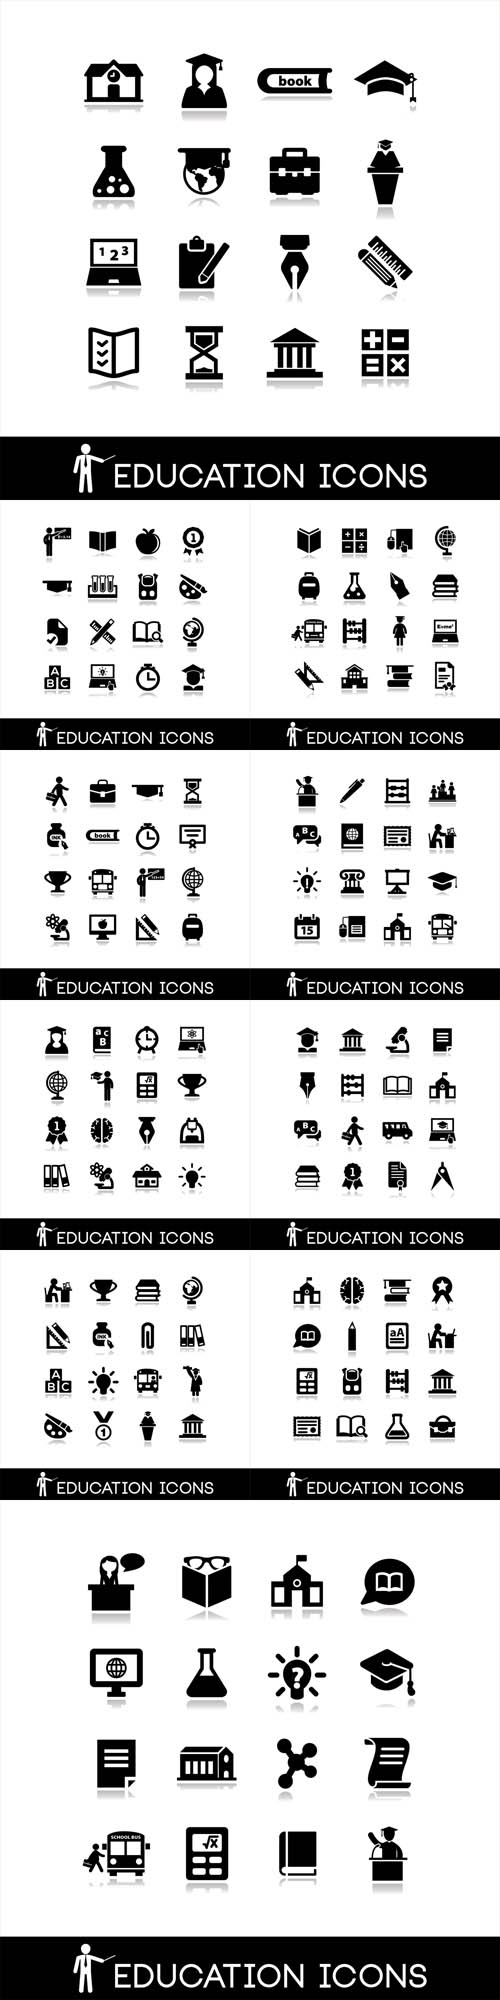 Vectors - Education and Learning Icons